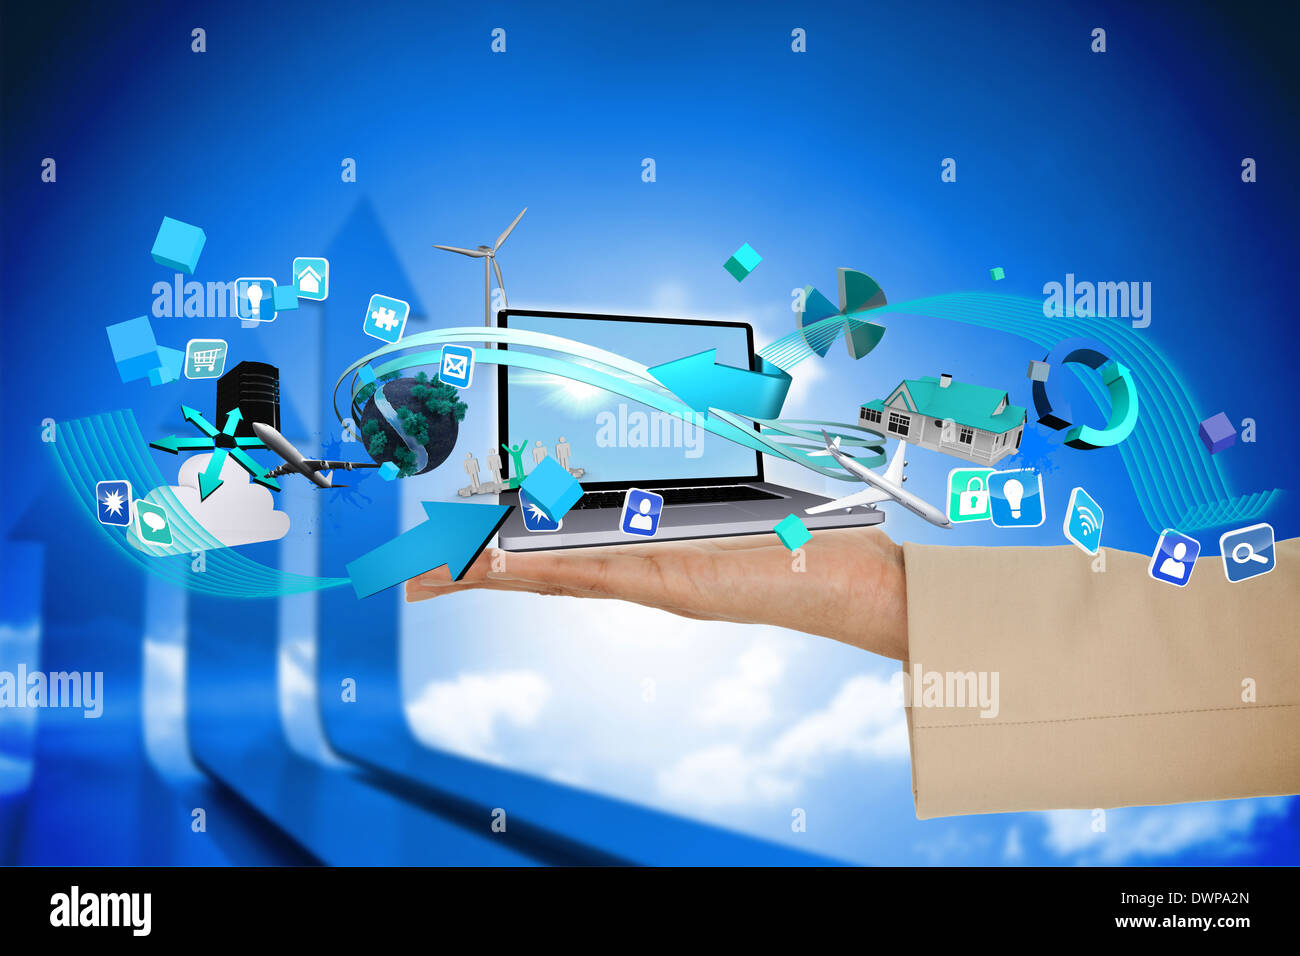 Hand presenting laptop and app icons Stock Photo